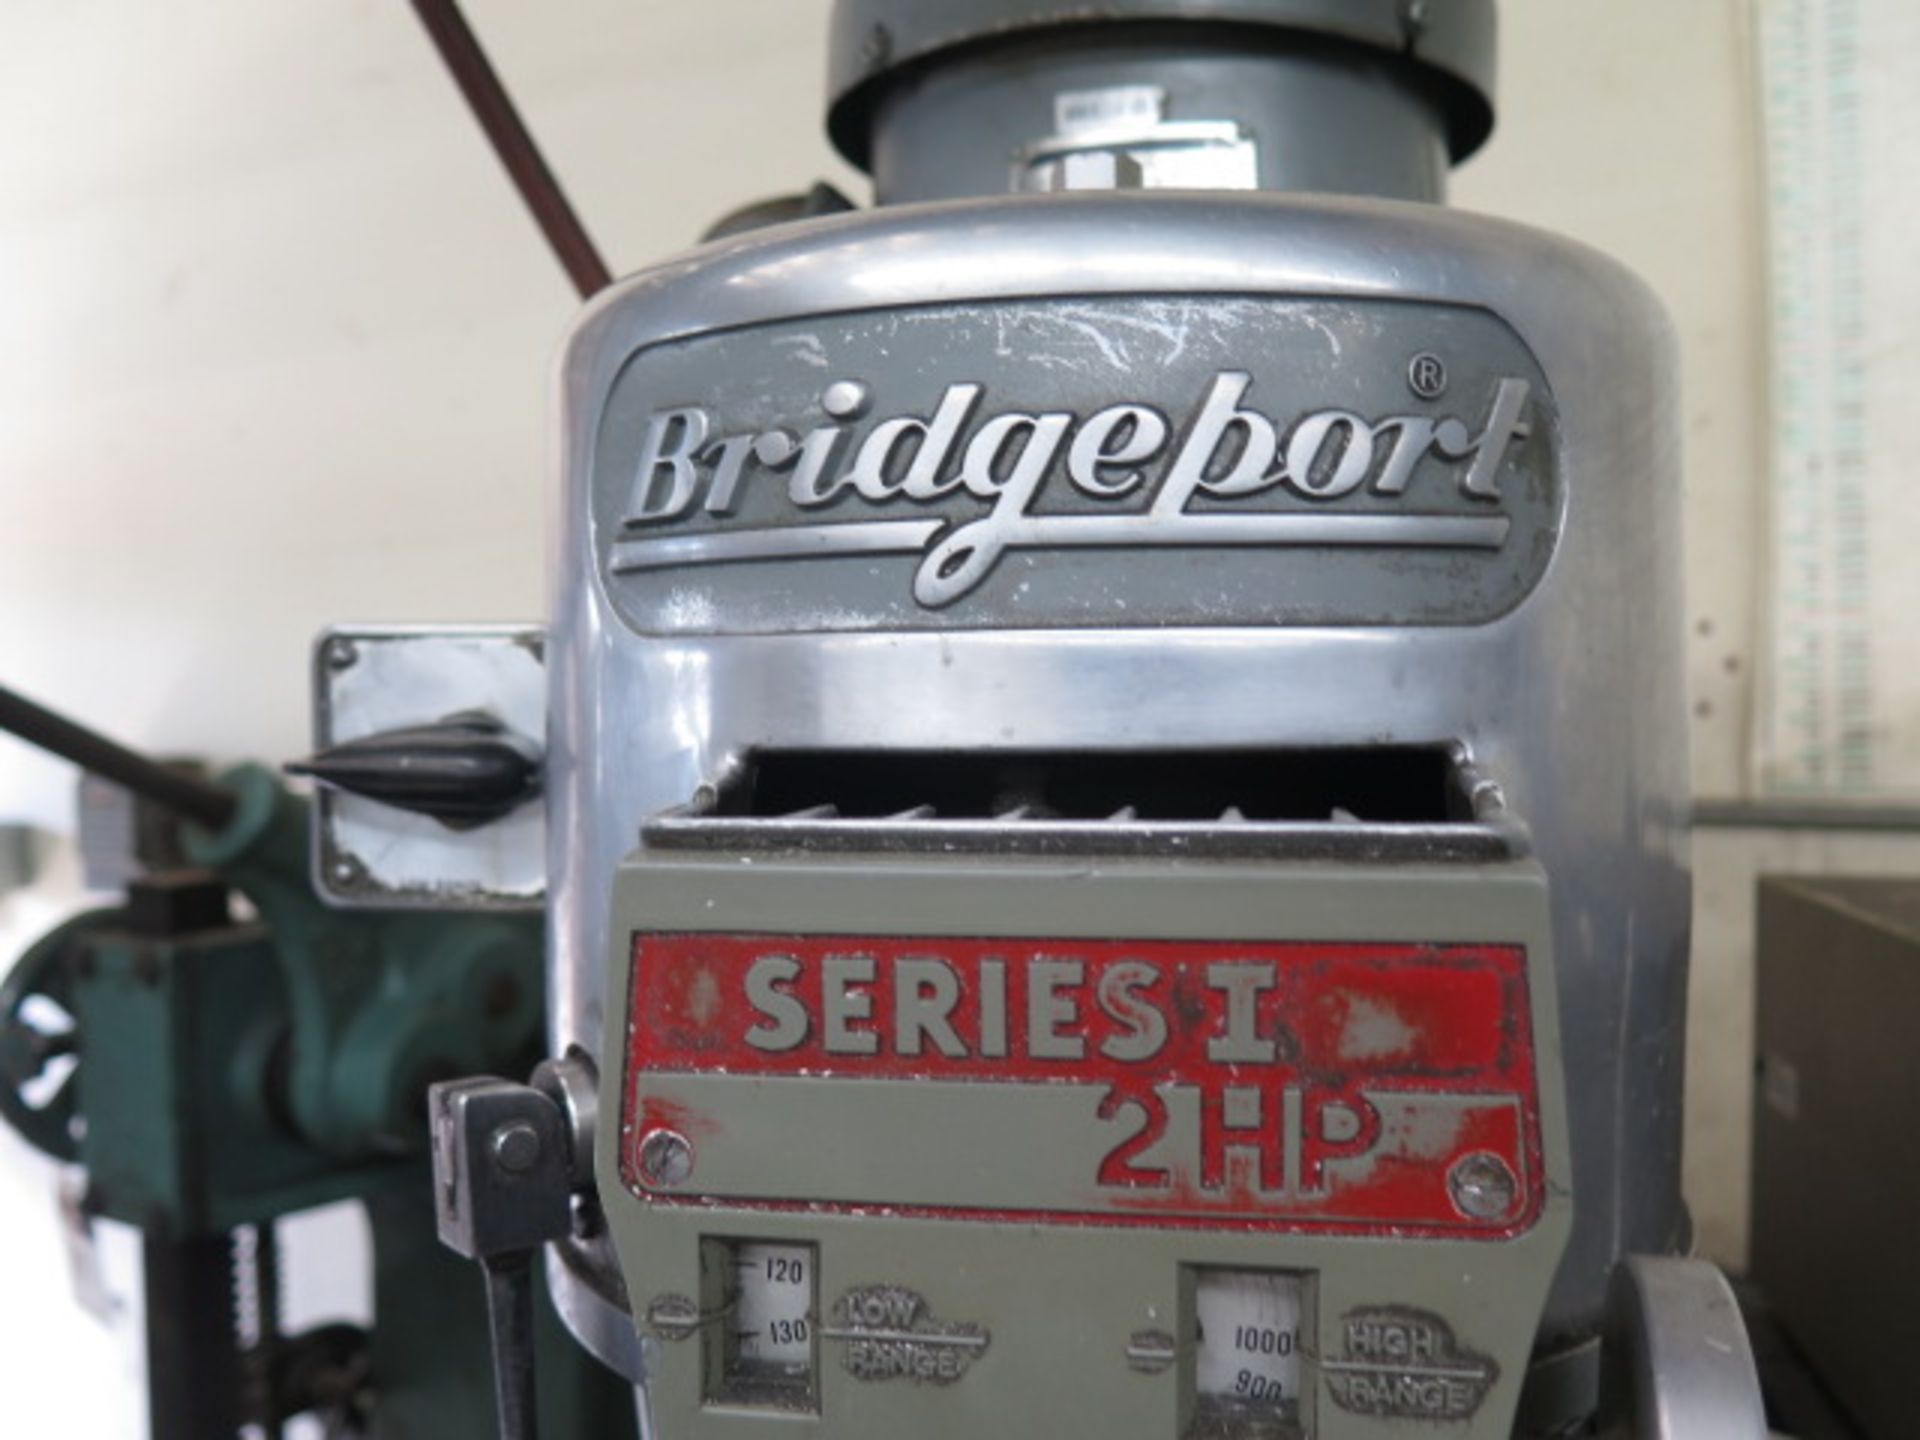 Bridgeport Series 1 – 2Hp Vertical Mill s/n 205172 w/ Sony DRO, 60-4200 Dial Change RPM, Chrome - Image 9 of 9